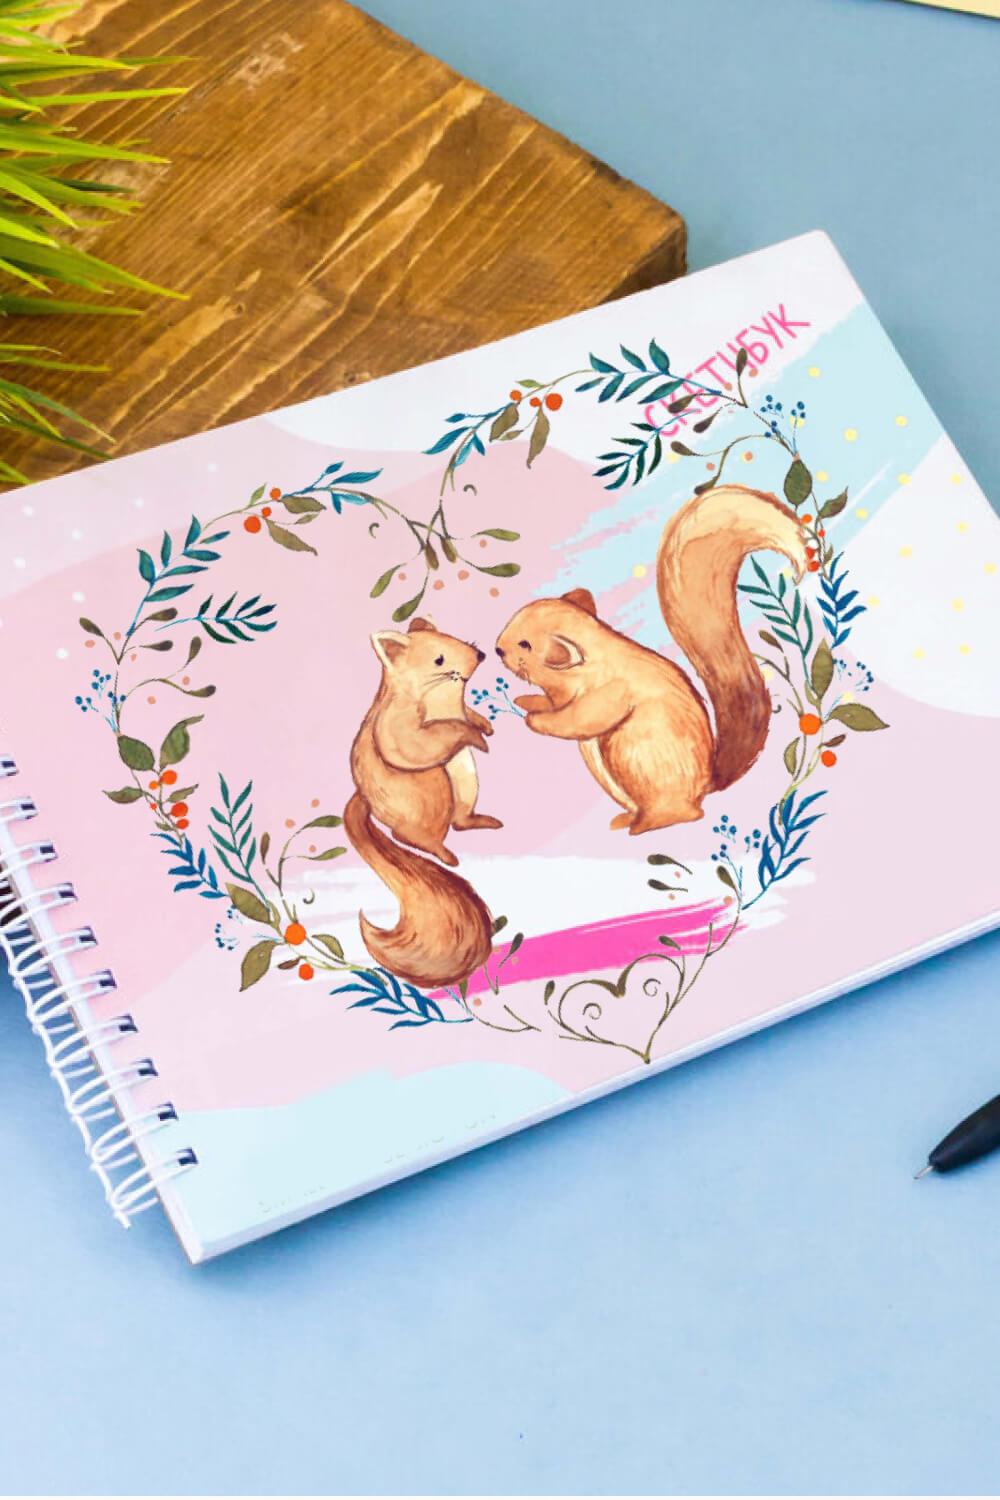 On the children's album, two squirrels are drawn that look at each other, and a heart is drawn around them with plants.